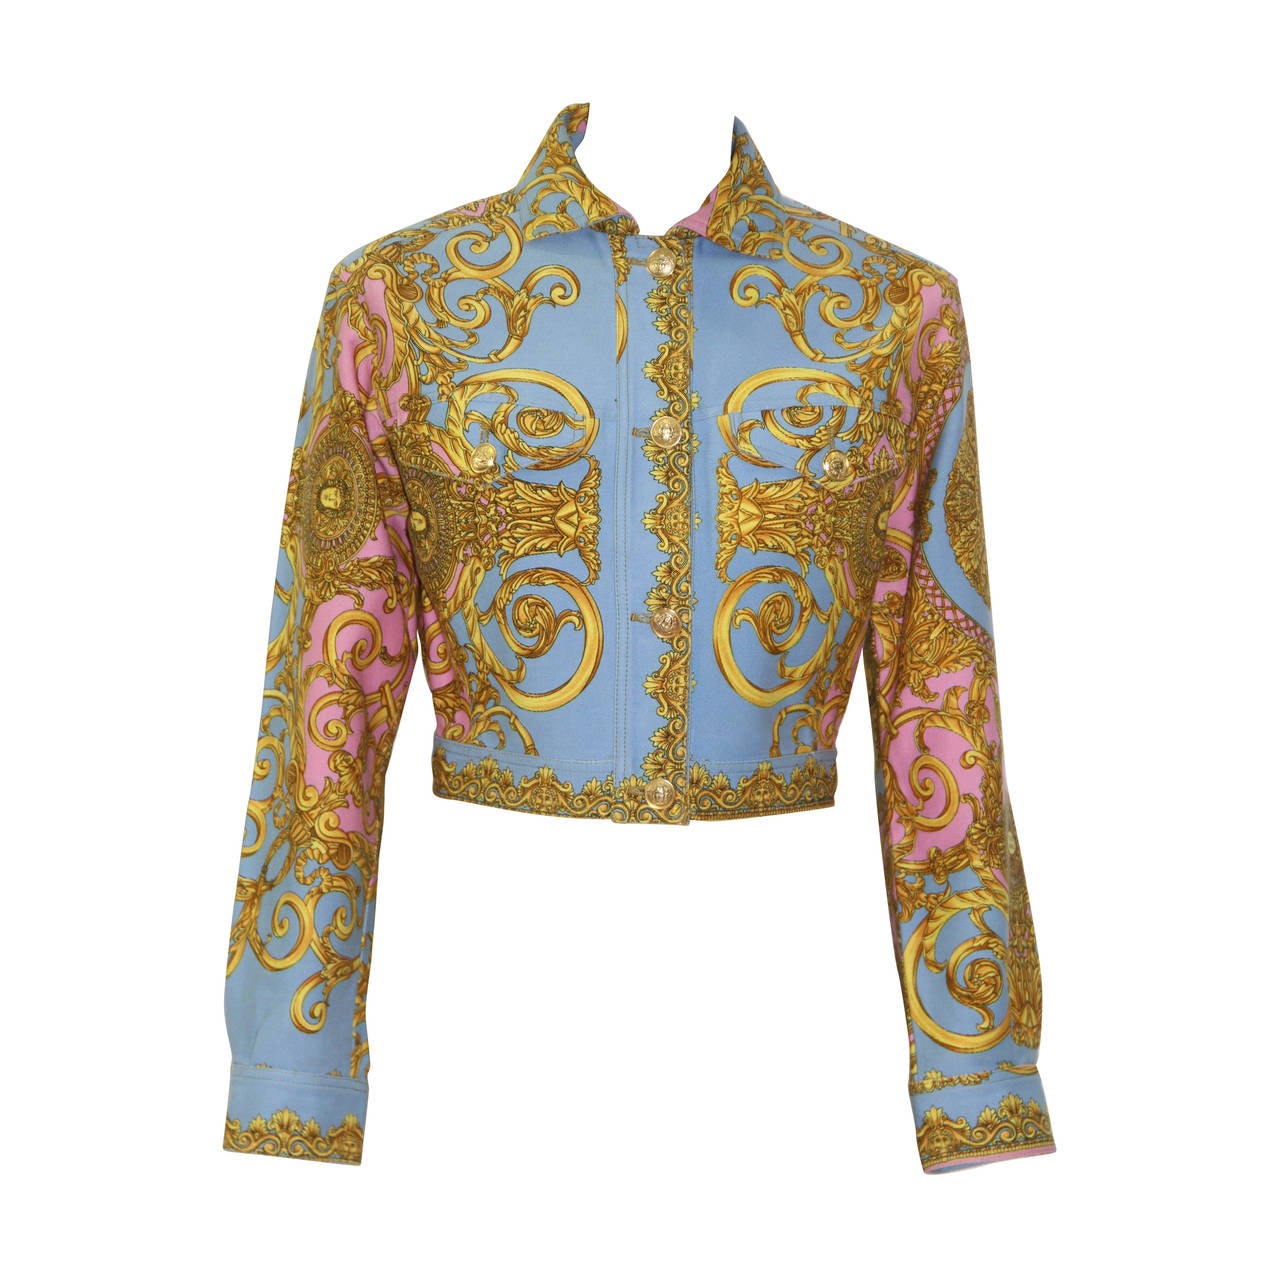 Gianni Versace Baroque Printed Short Jacket Spring 1992 For Sale